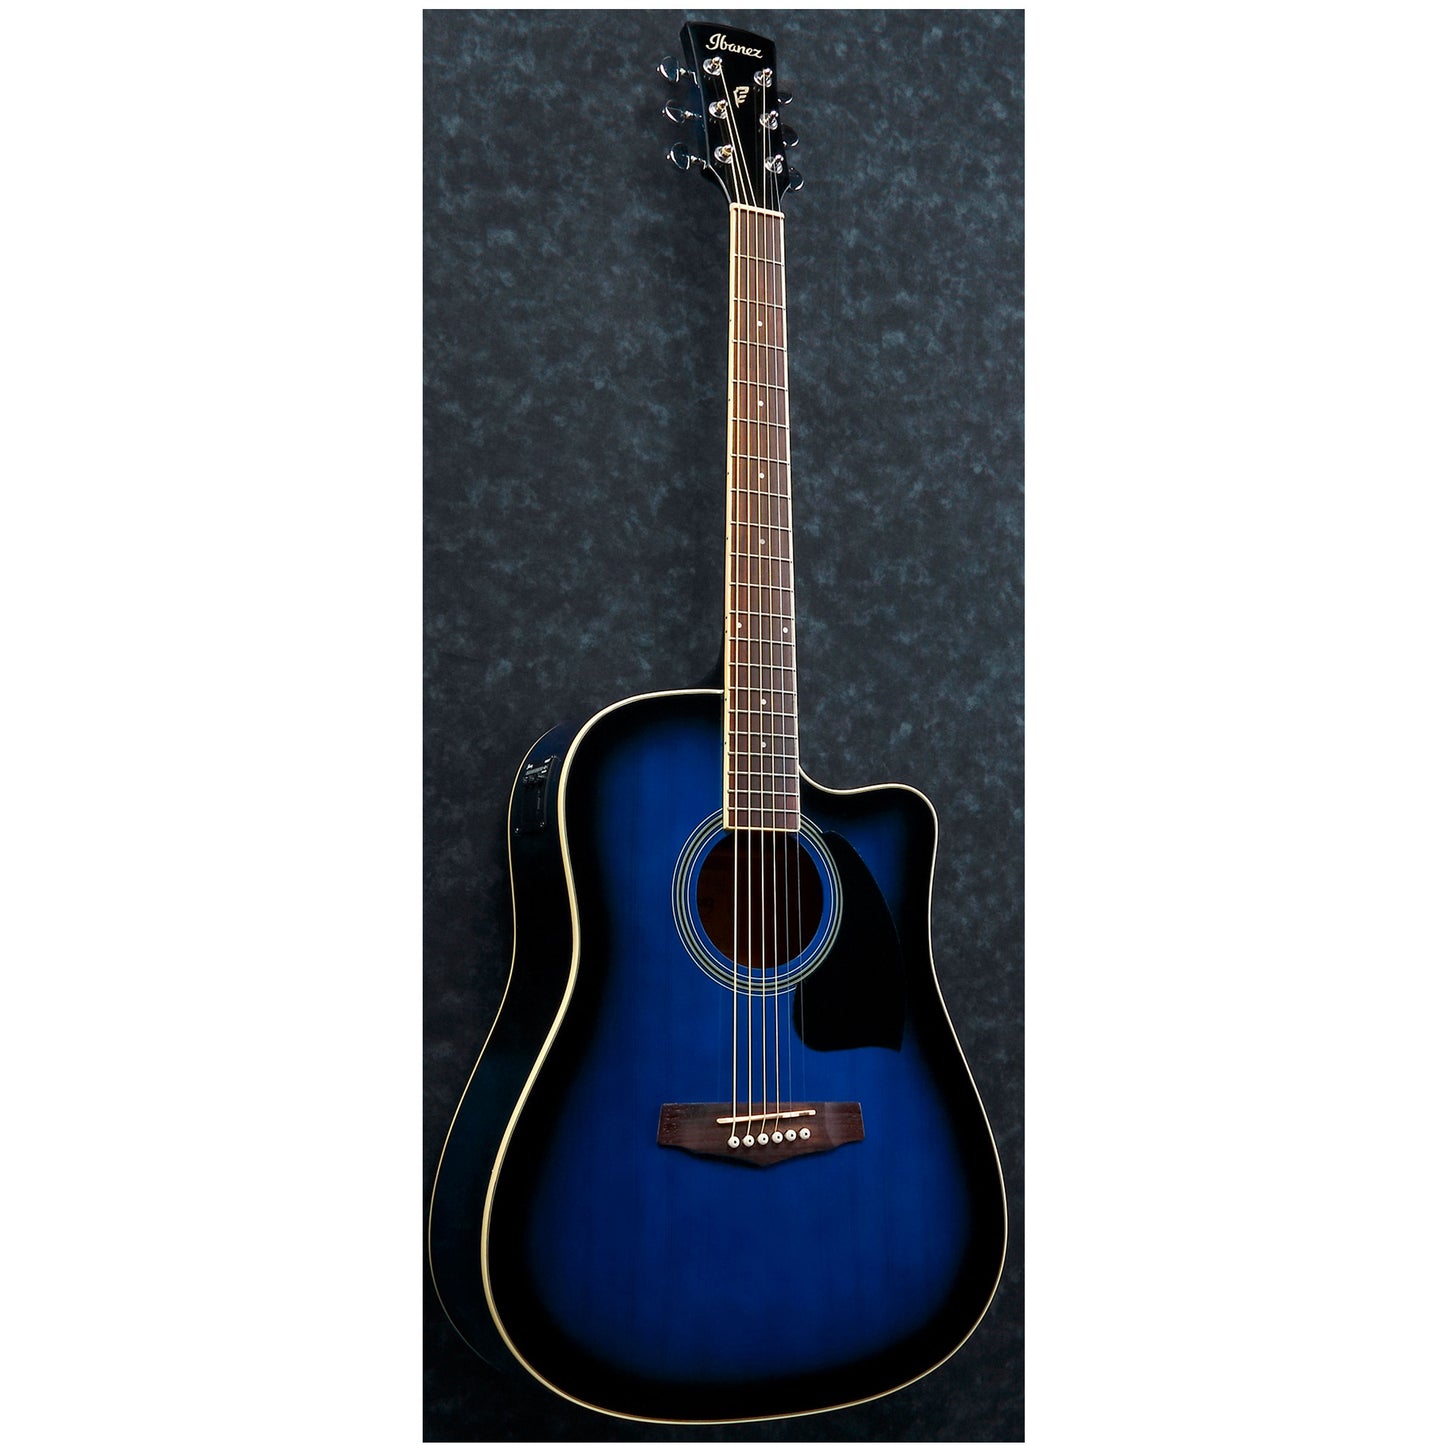 Ibanez PF15ECETBS Dreadnought 6 String Acoustic-Electric